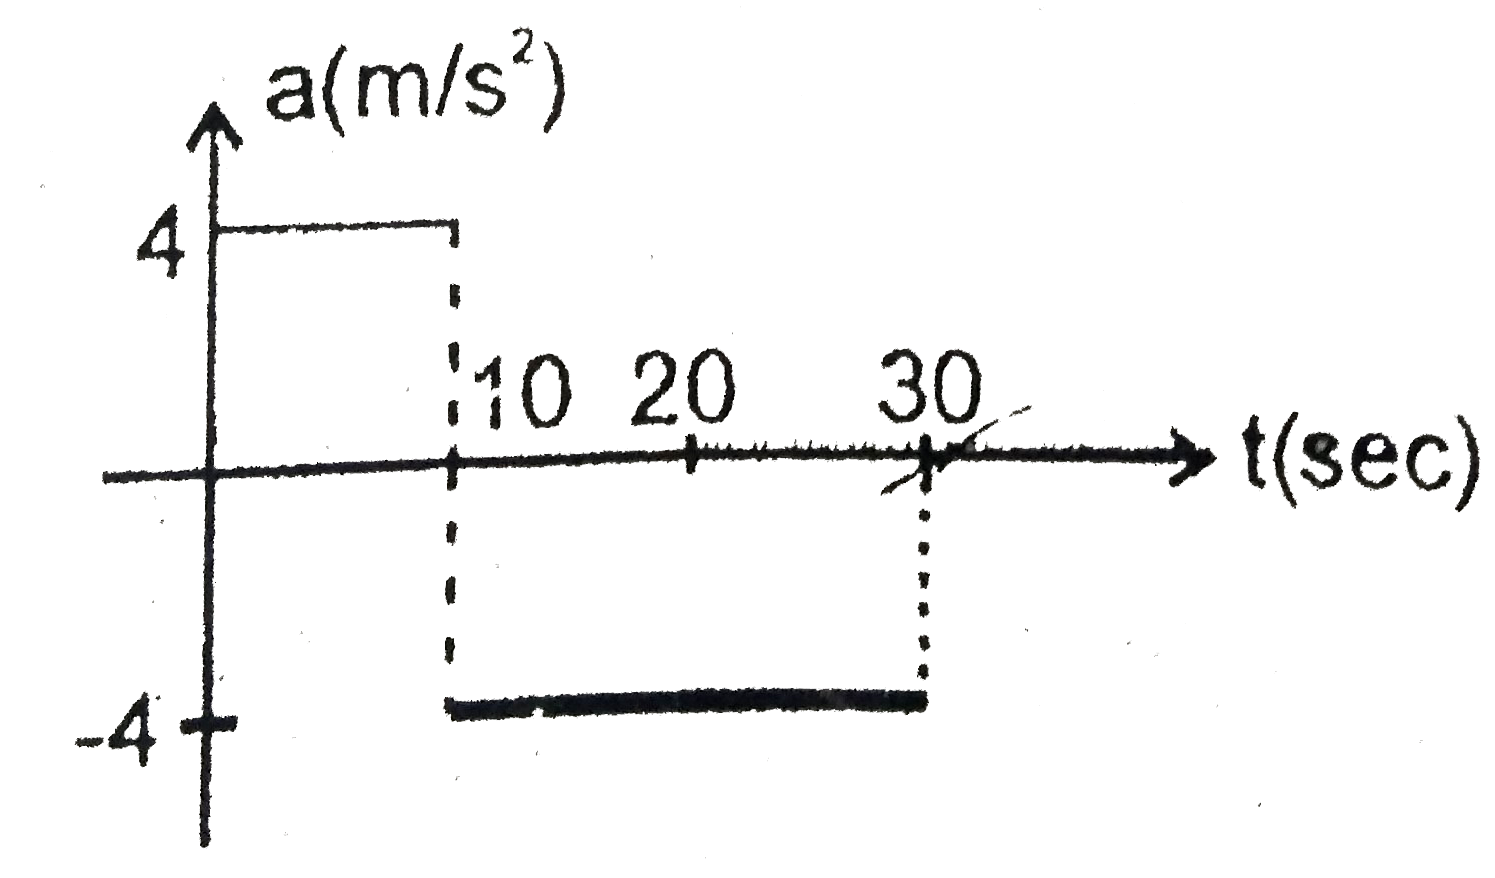 The acceleration versus time graph for a particle moving along a straight line is shown in the figure. If the particle starts from rest at t = 0, then its speed at t = 30 sec will be :